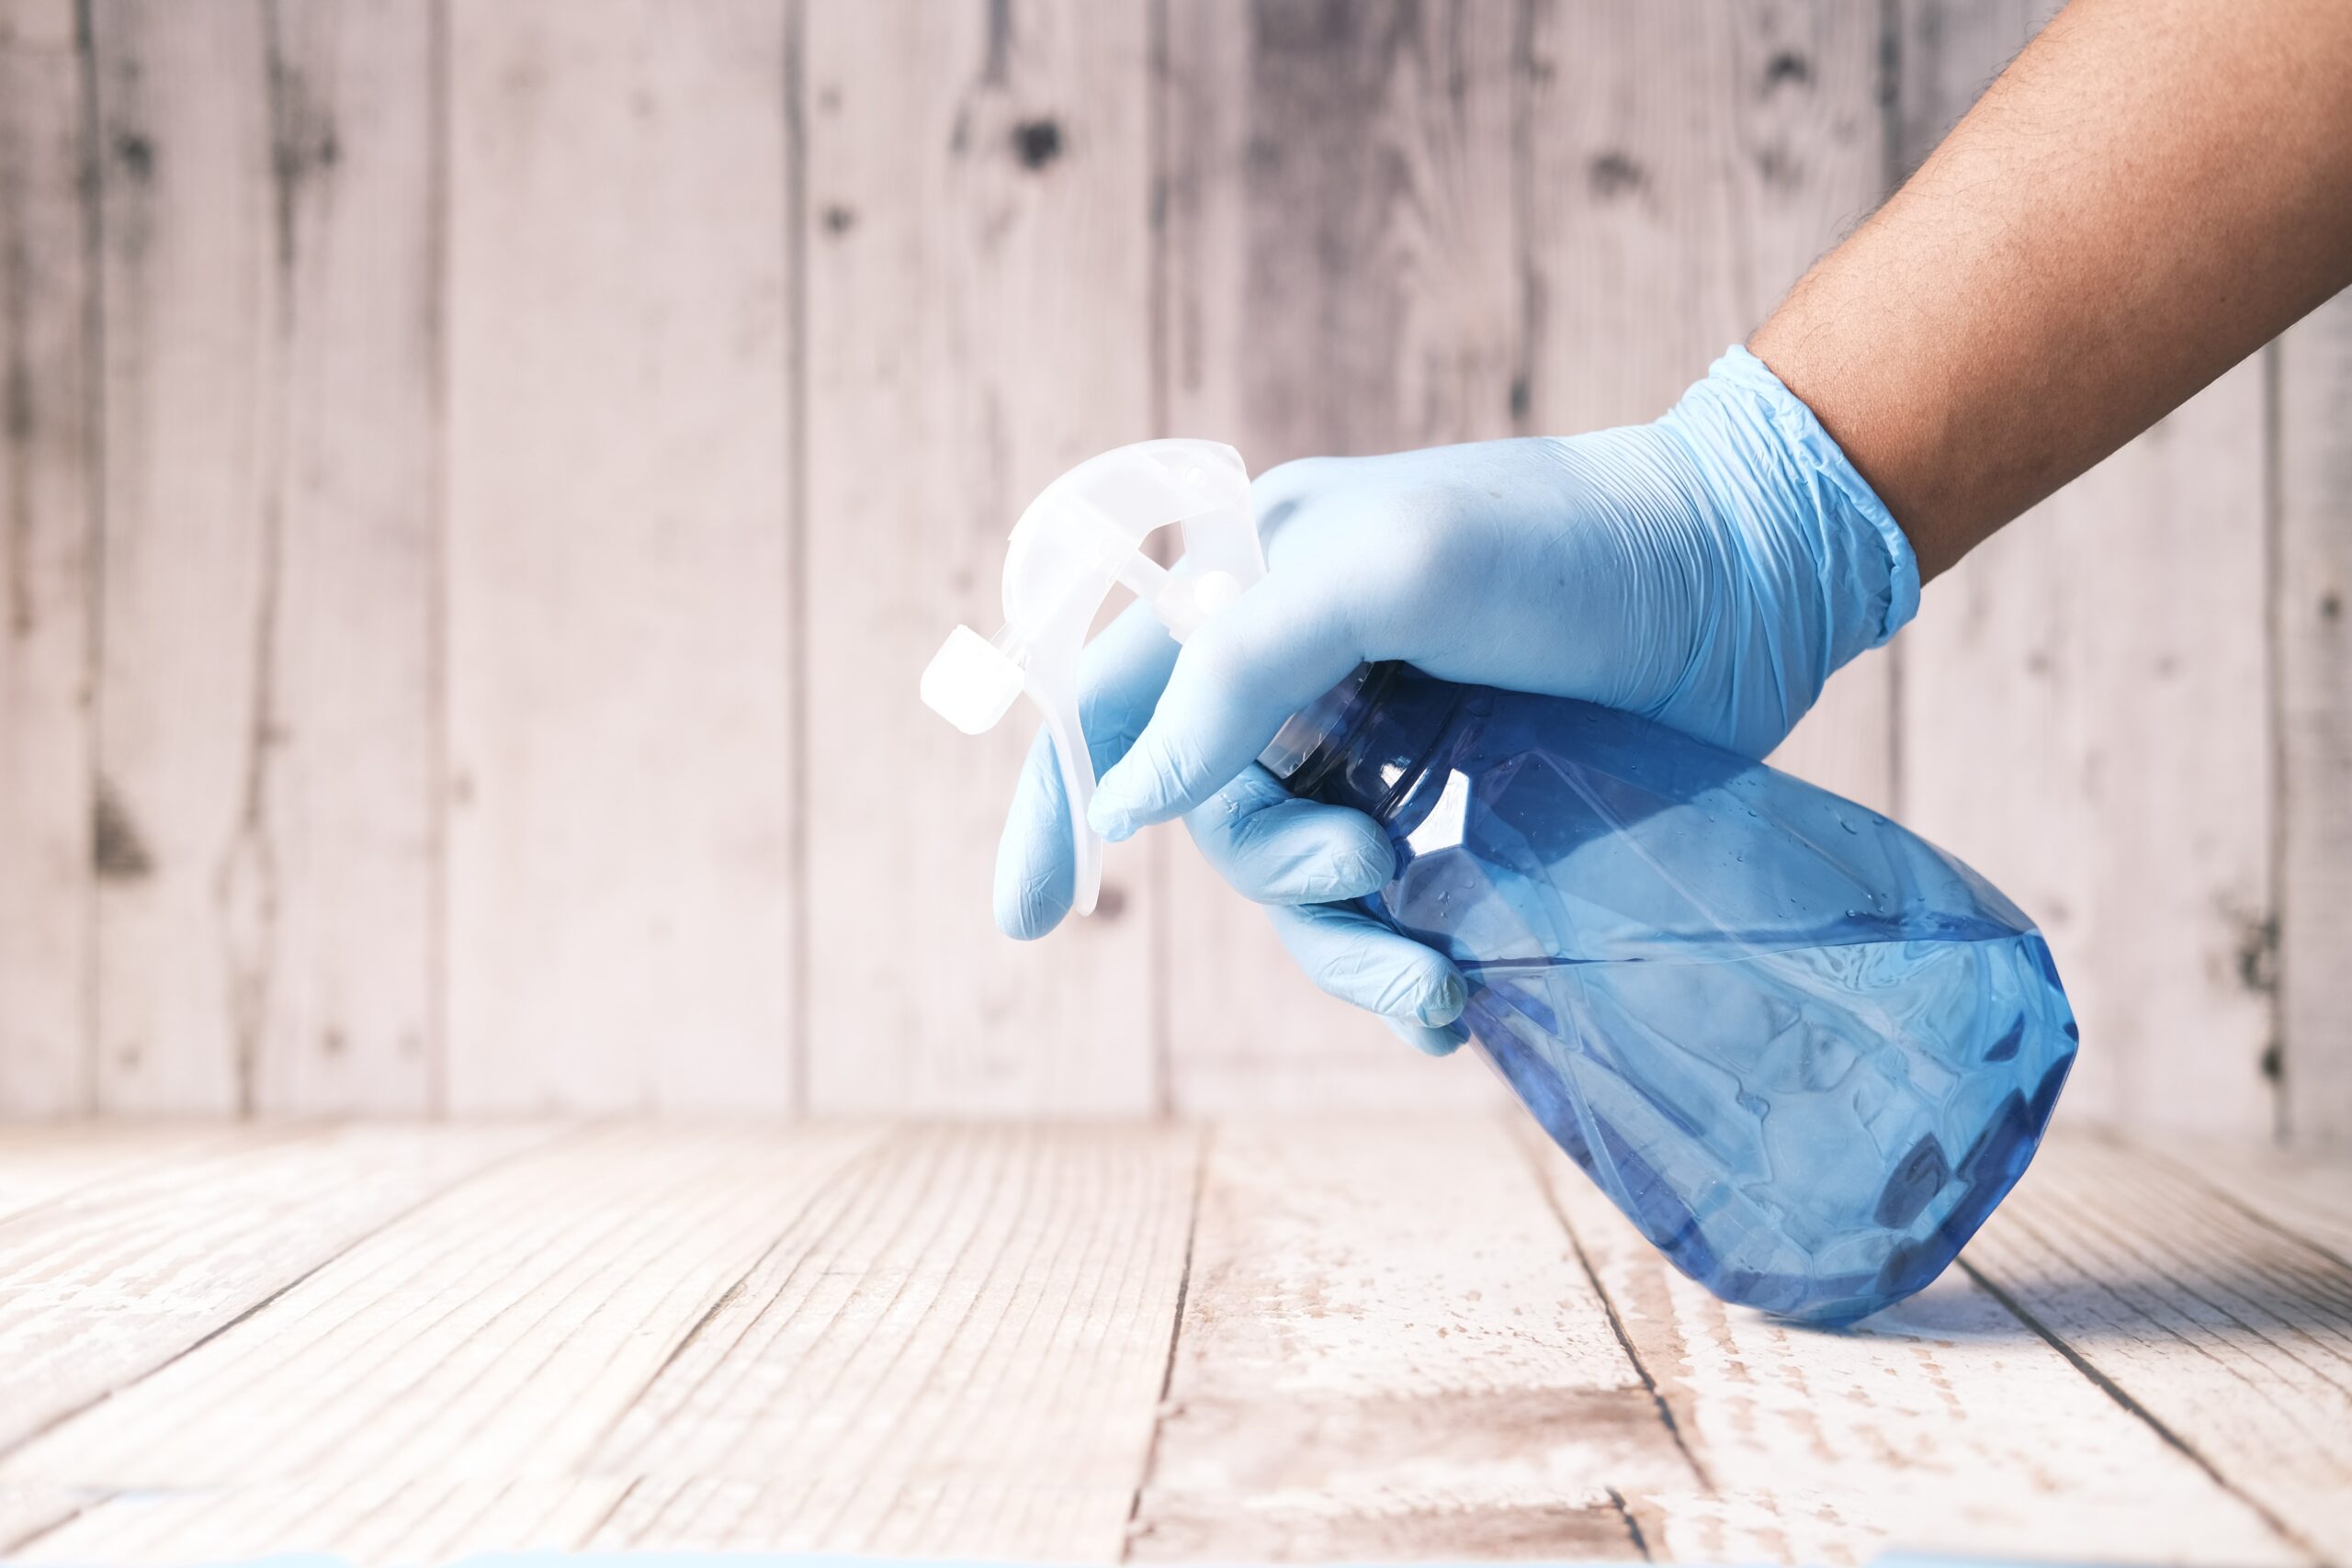 6 Mold Removal Tips from a Mold Remediation Technician